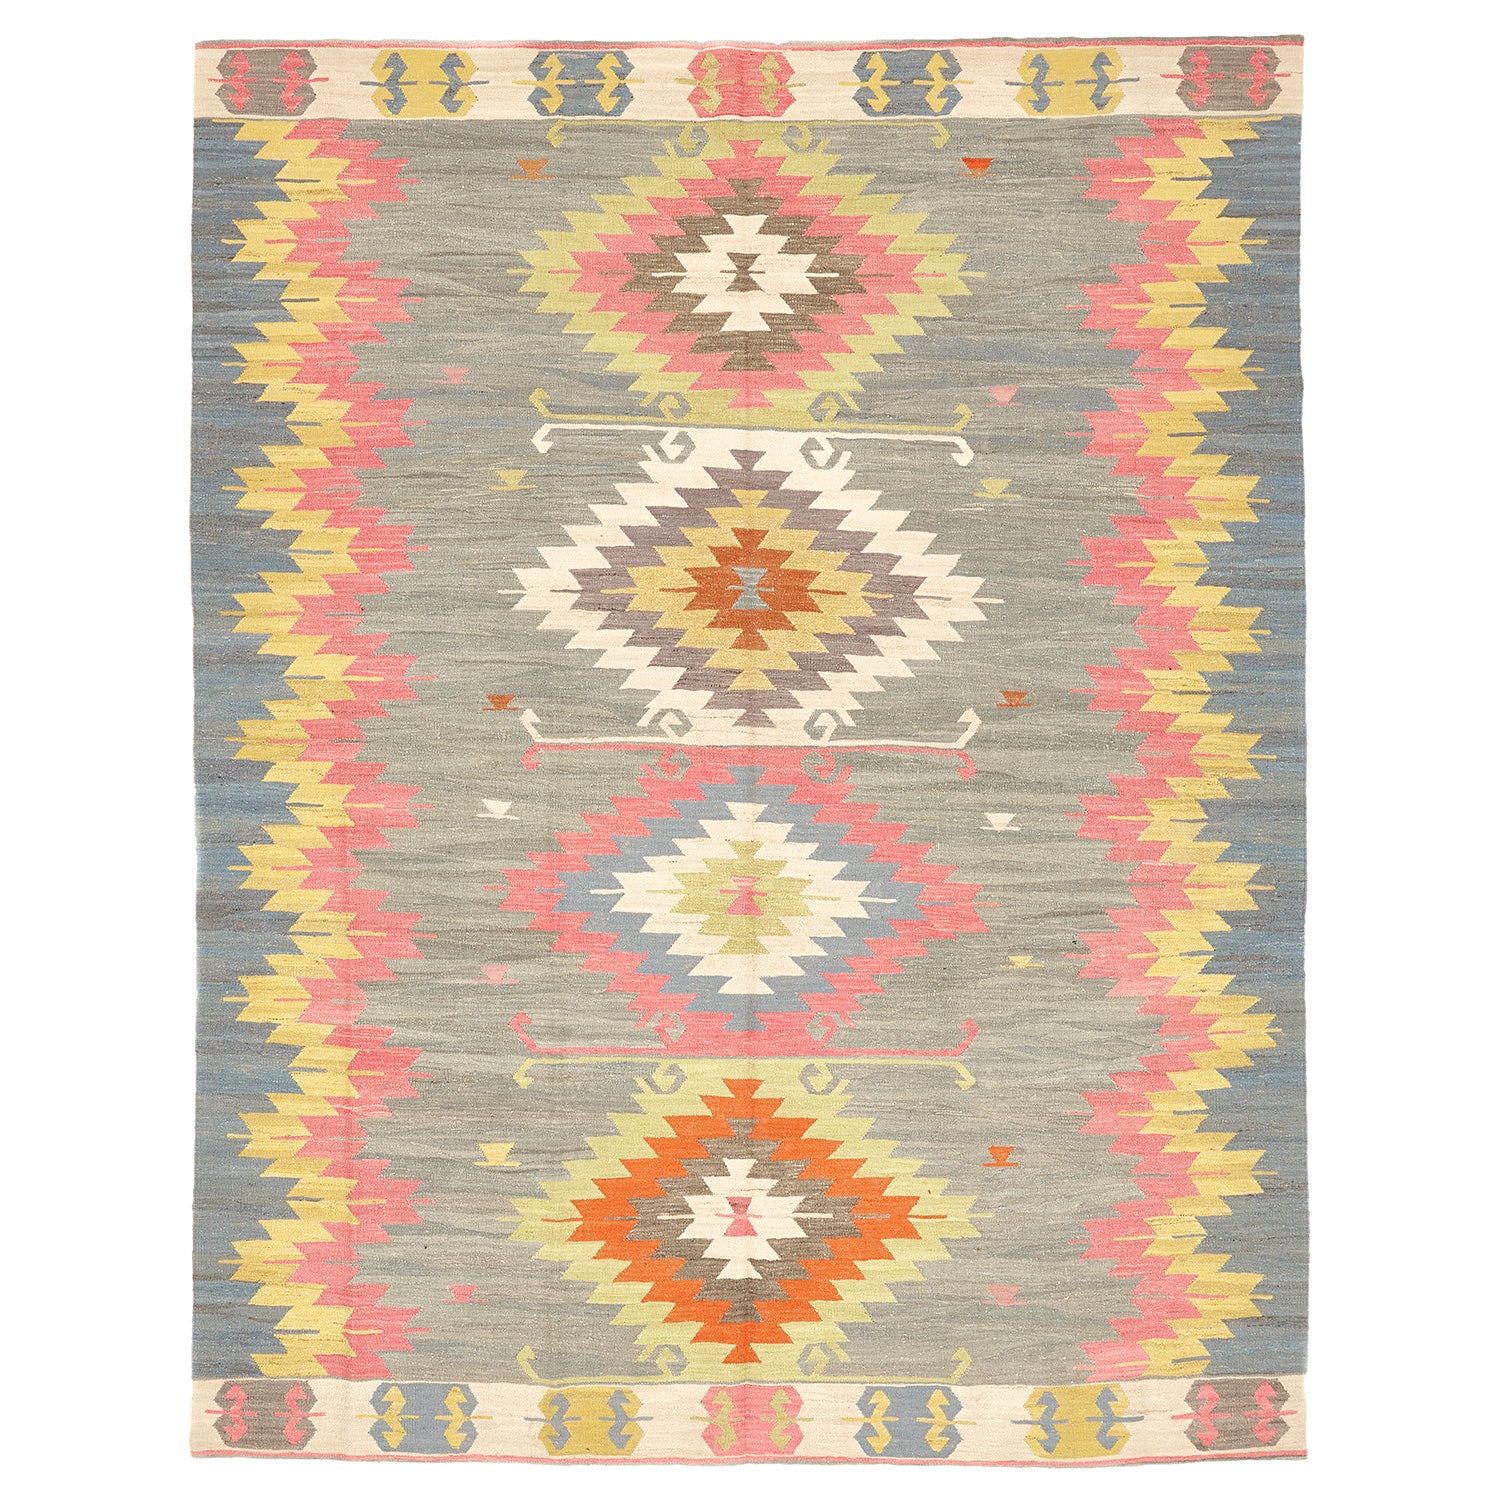 Vibrant tribal rug with symmetrical diamond patterns in muted background.